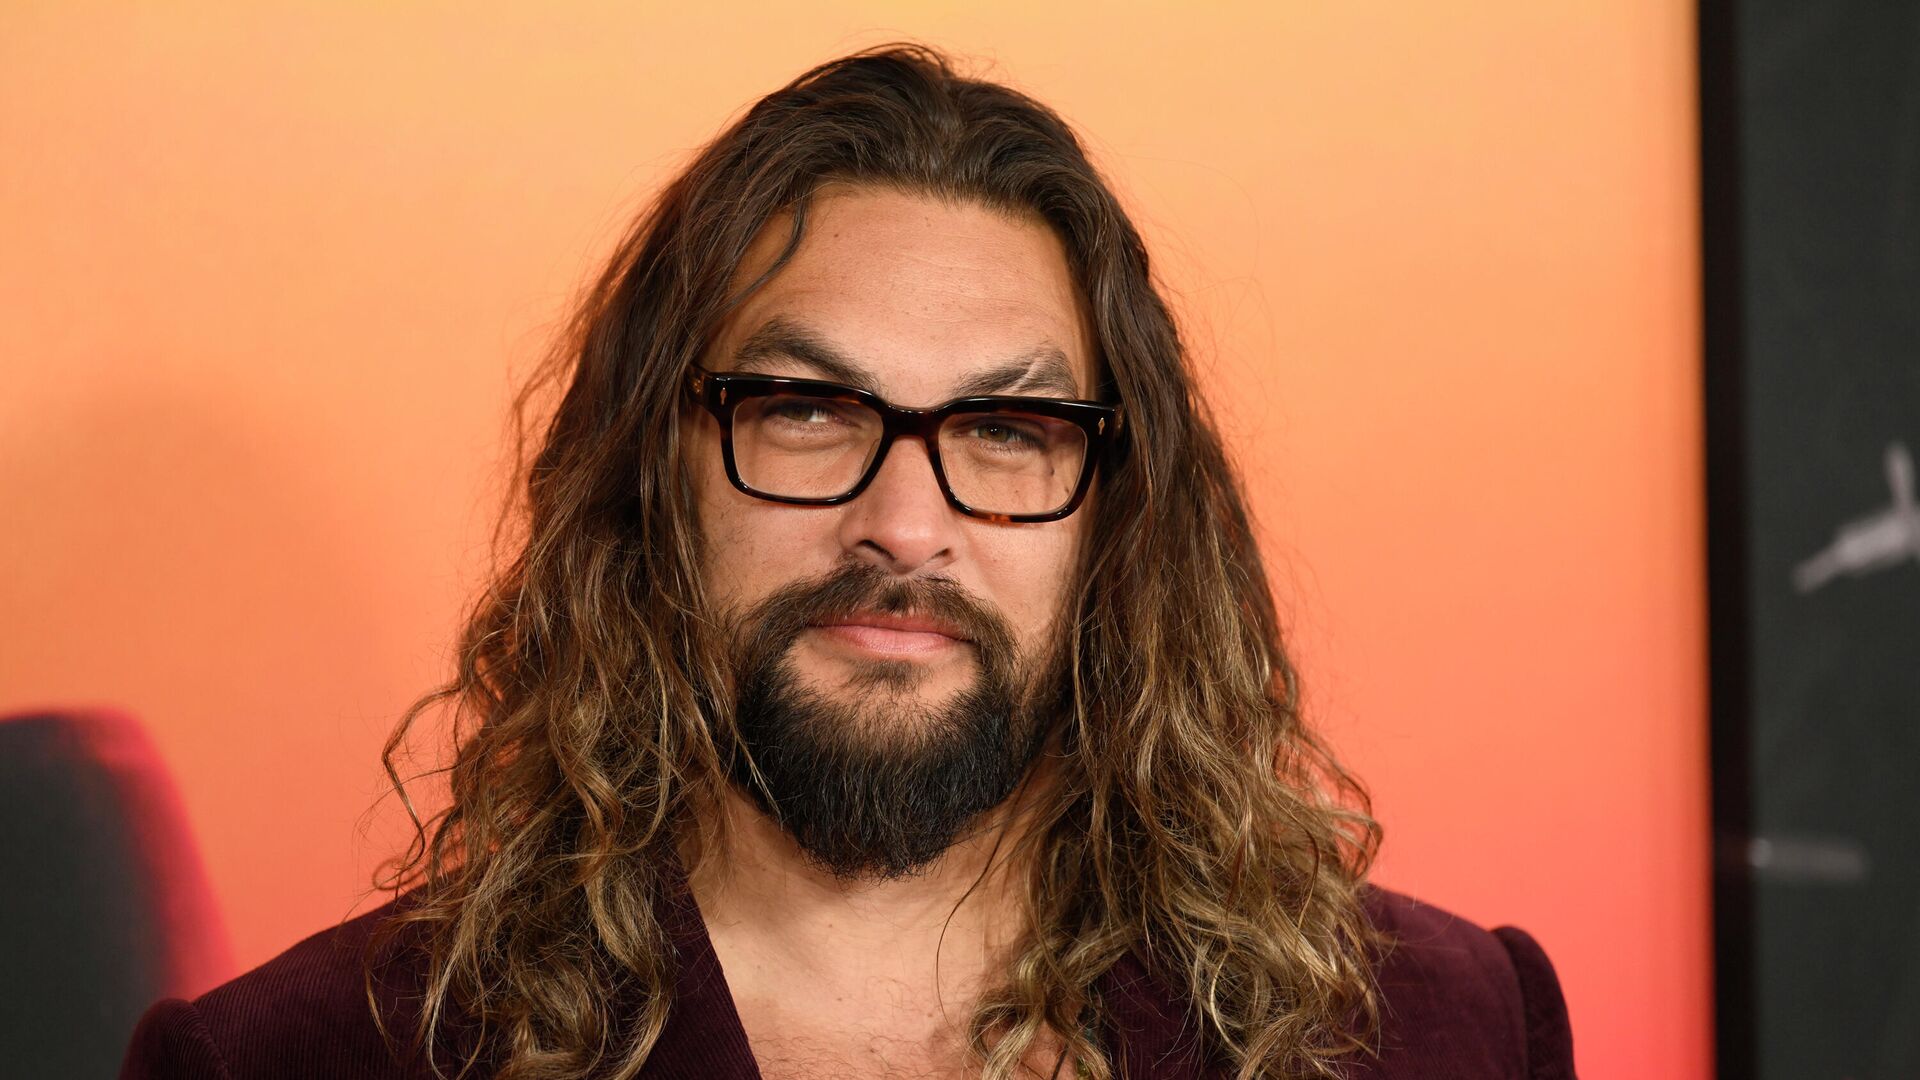 Jason Momoa attends the world premiere of The Batman at Lincoln Center Josie Robertson Plaza on Tuesday, March 1, 2022, in New York - Sputnik International, 1920, 28.04.2022